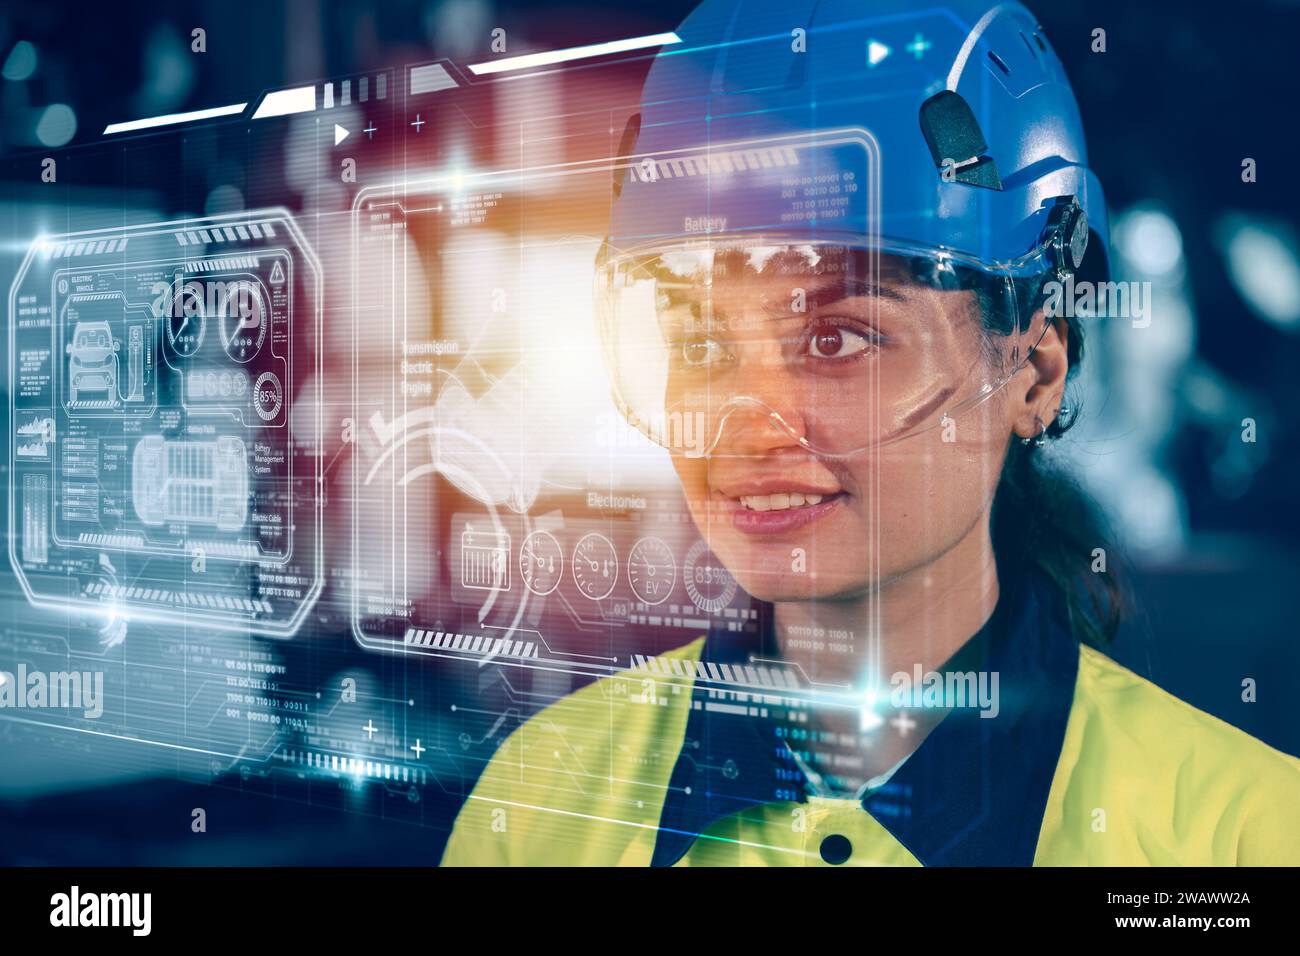 Engineer Women Industrial Factory Chief Wearing AR Headset Designs Prototype Electric EV Car on Holographic Device. Futuristic Virtual Design Technolo Stock Photo